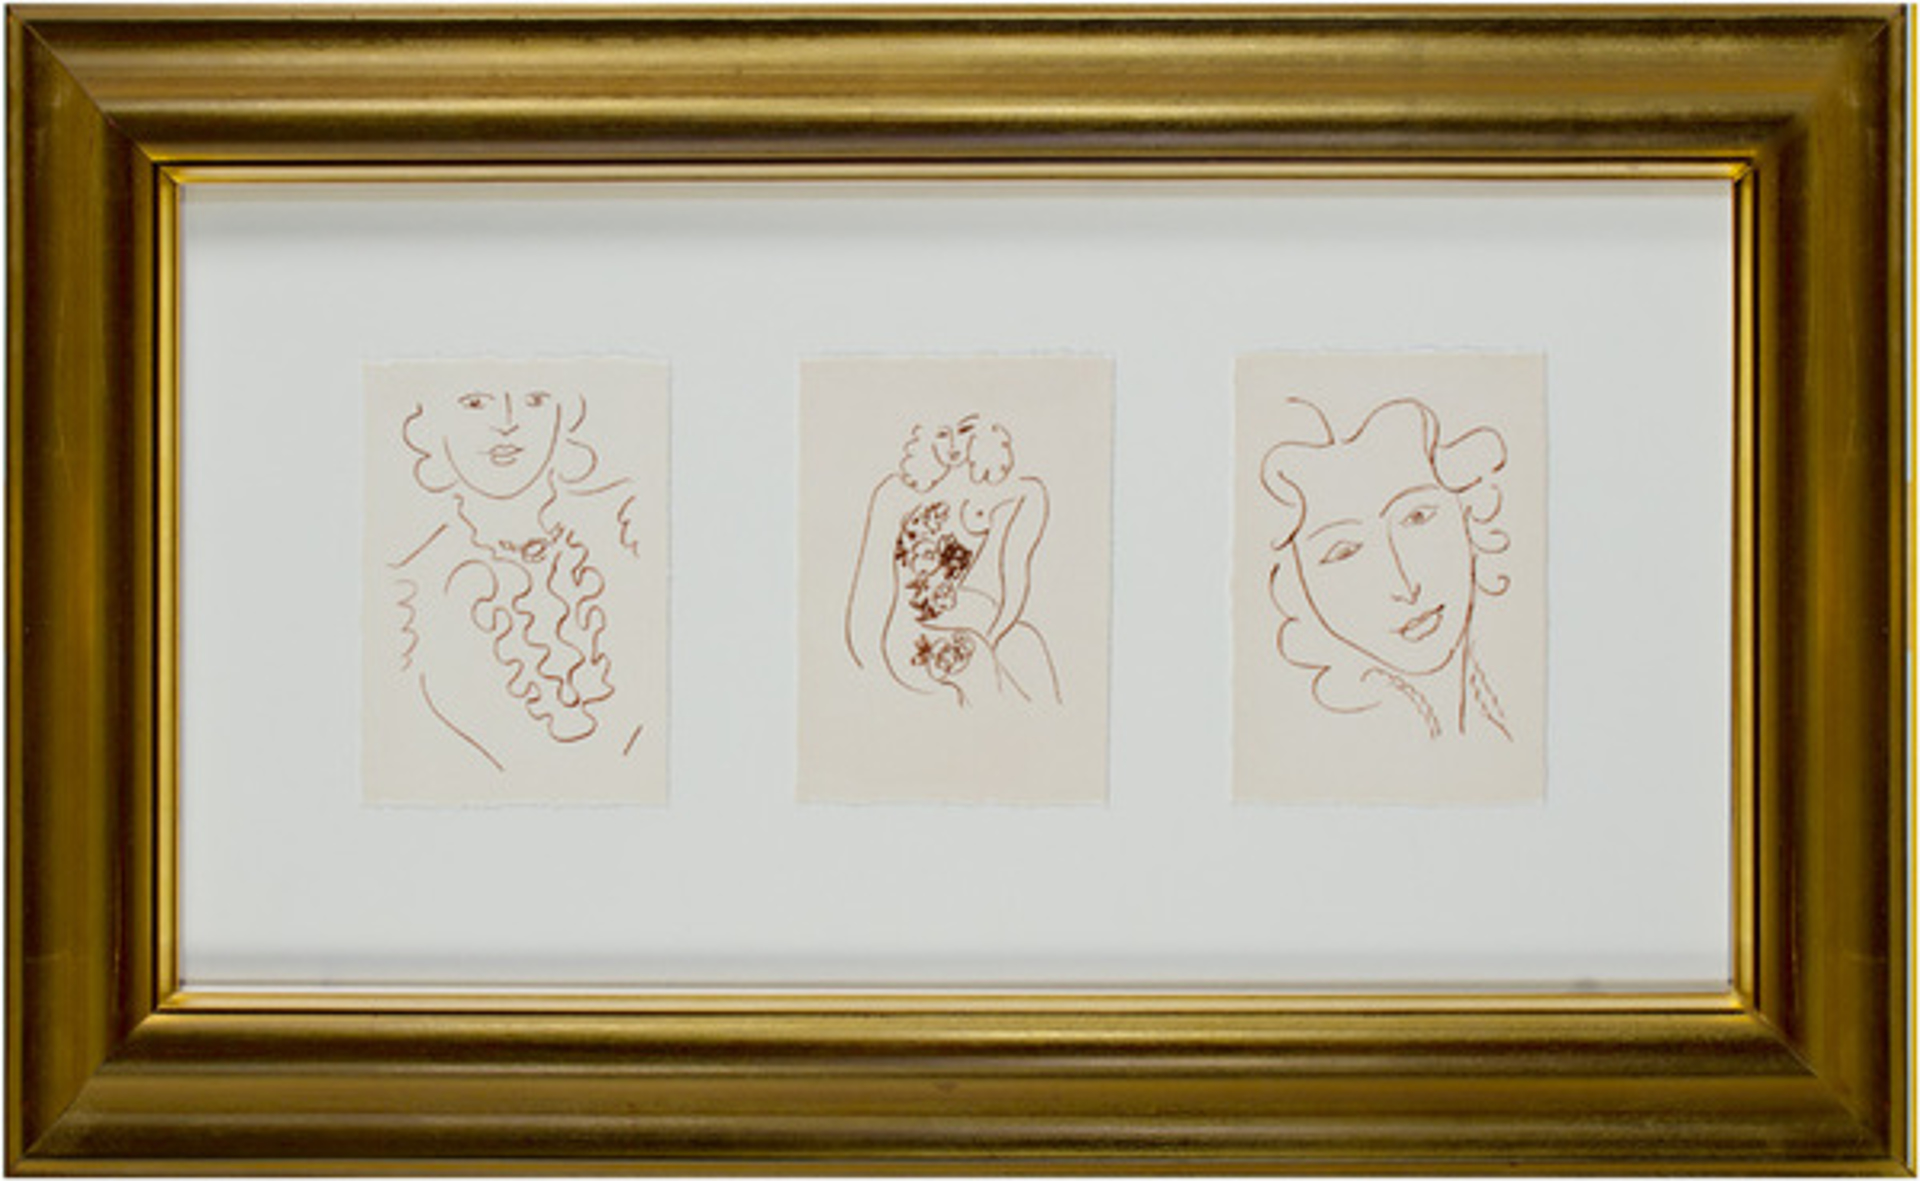 L-to-R: Woman w/Ruffled Blouse&Antique Necklace, Nude w/Flowers, Head of Woman Relaxed. Florilege des Amours de Ronsard Portfolio by Henri Matisse